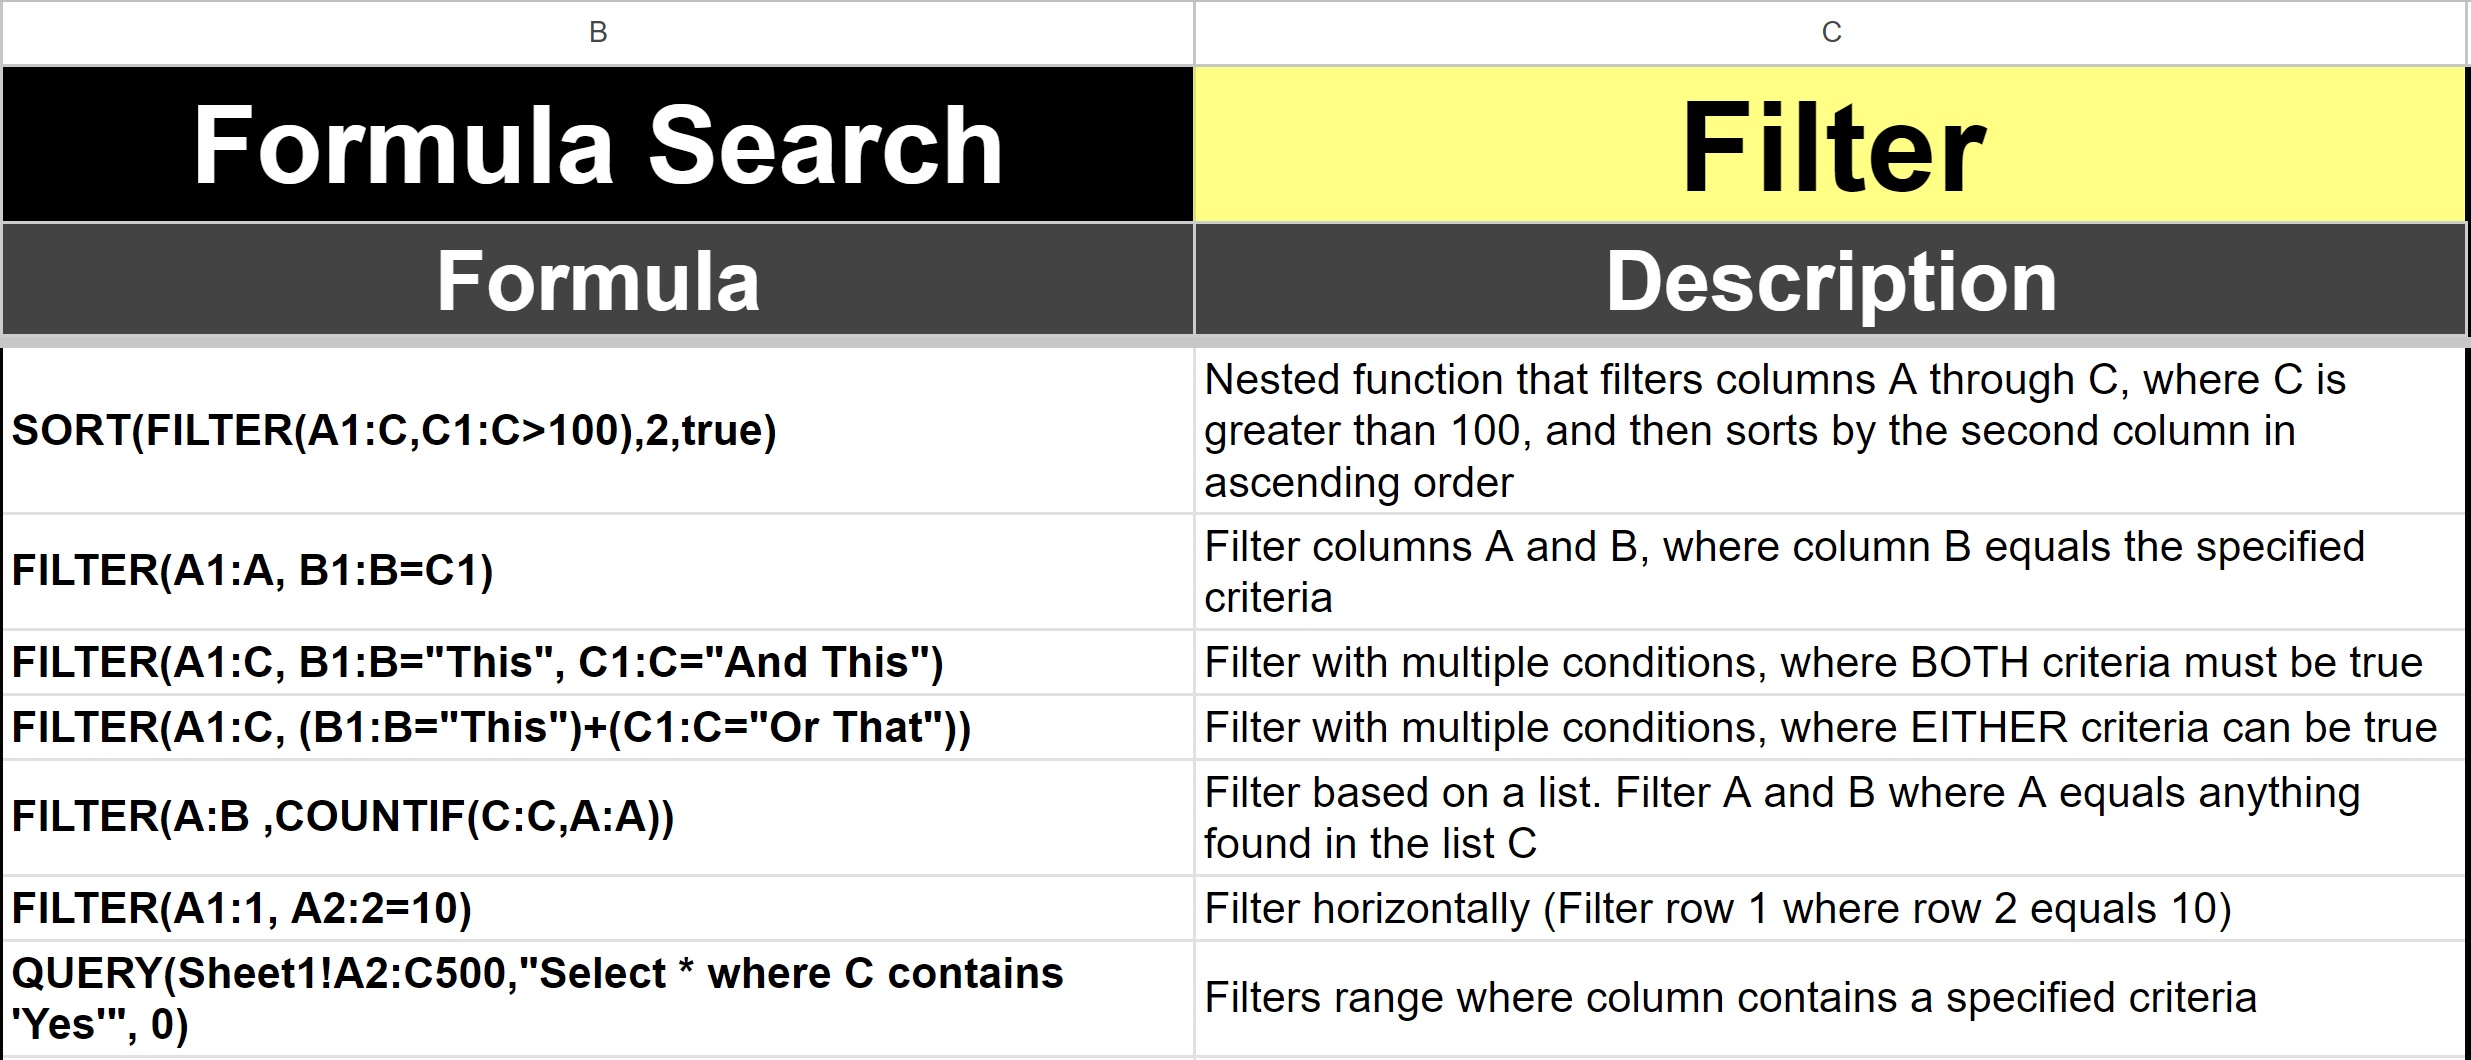 Example of the Google Sheets formula search feature for the ultimate cheat sheet